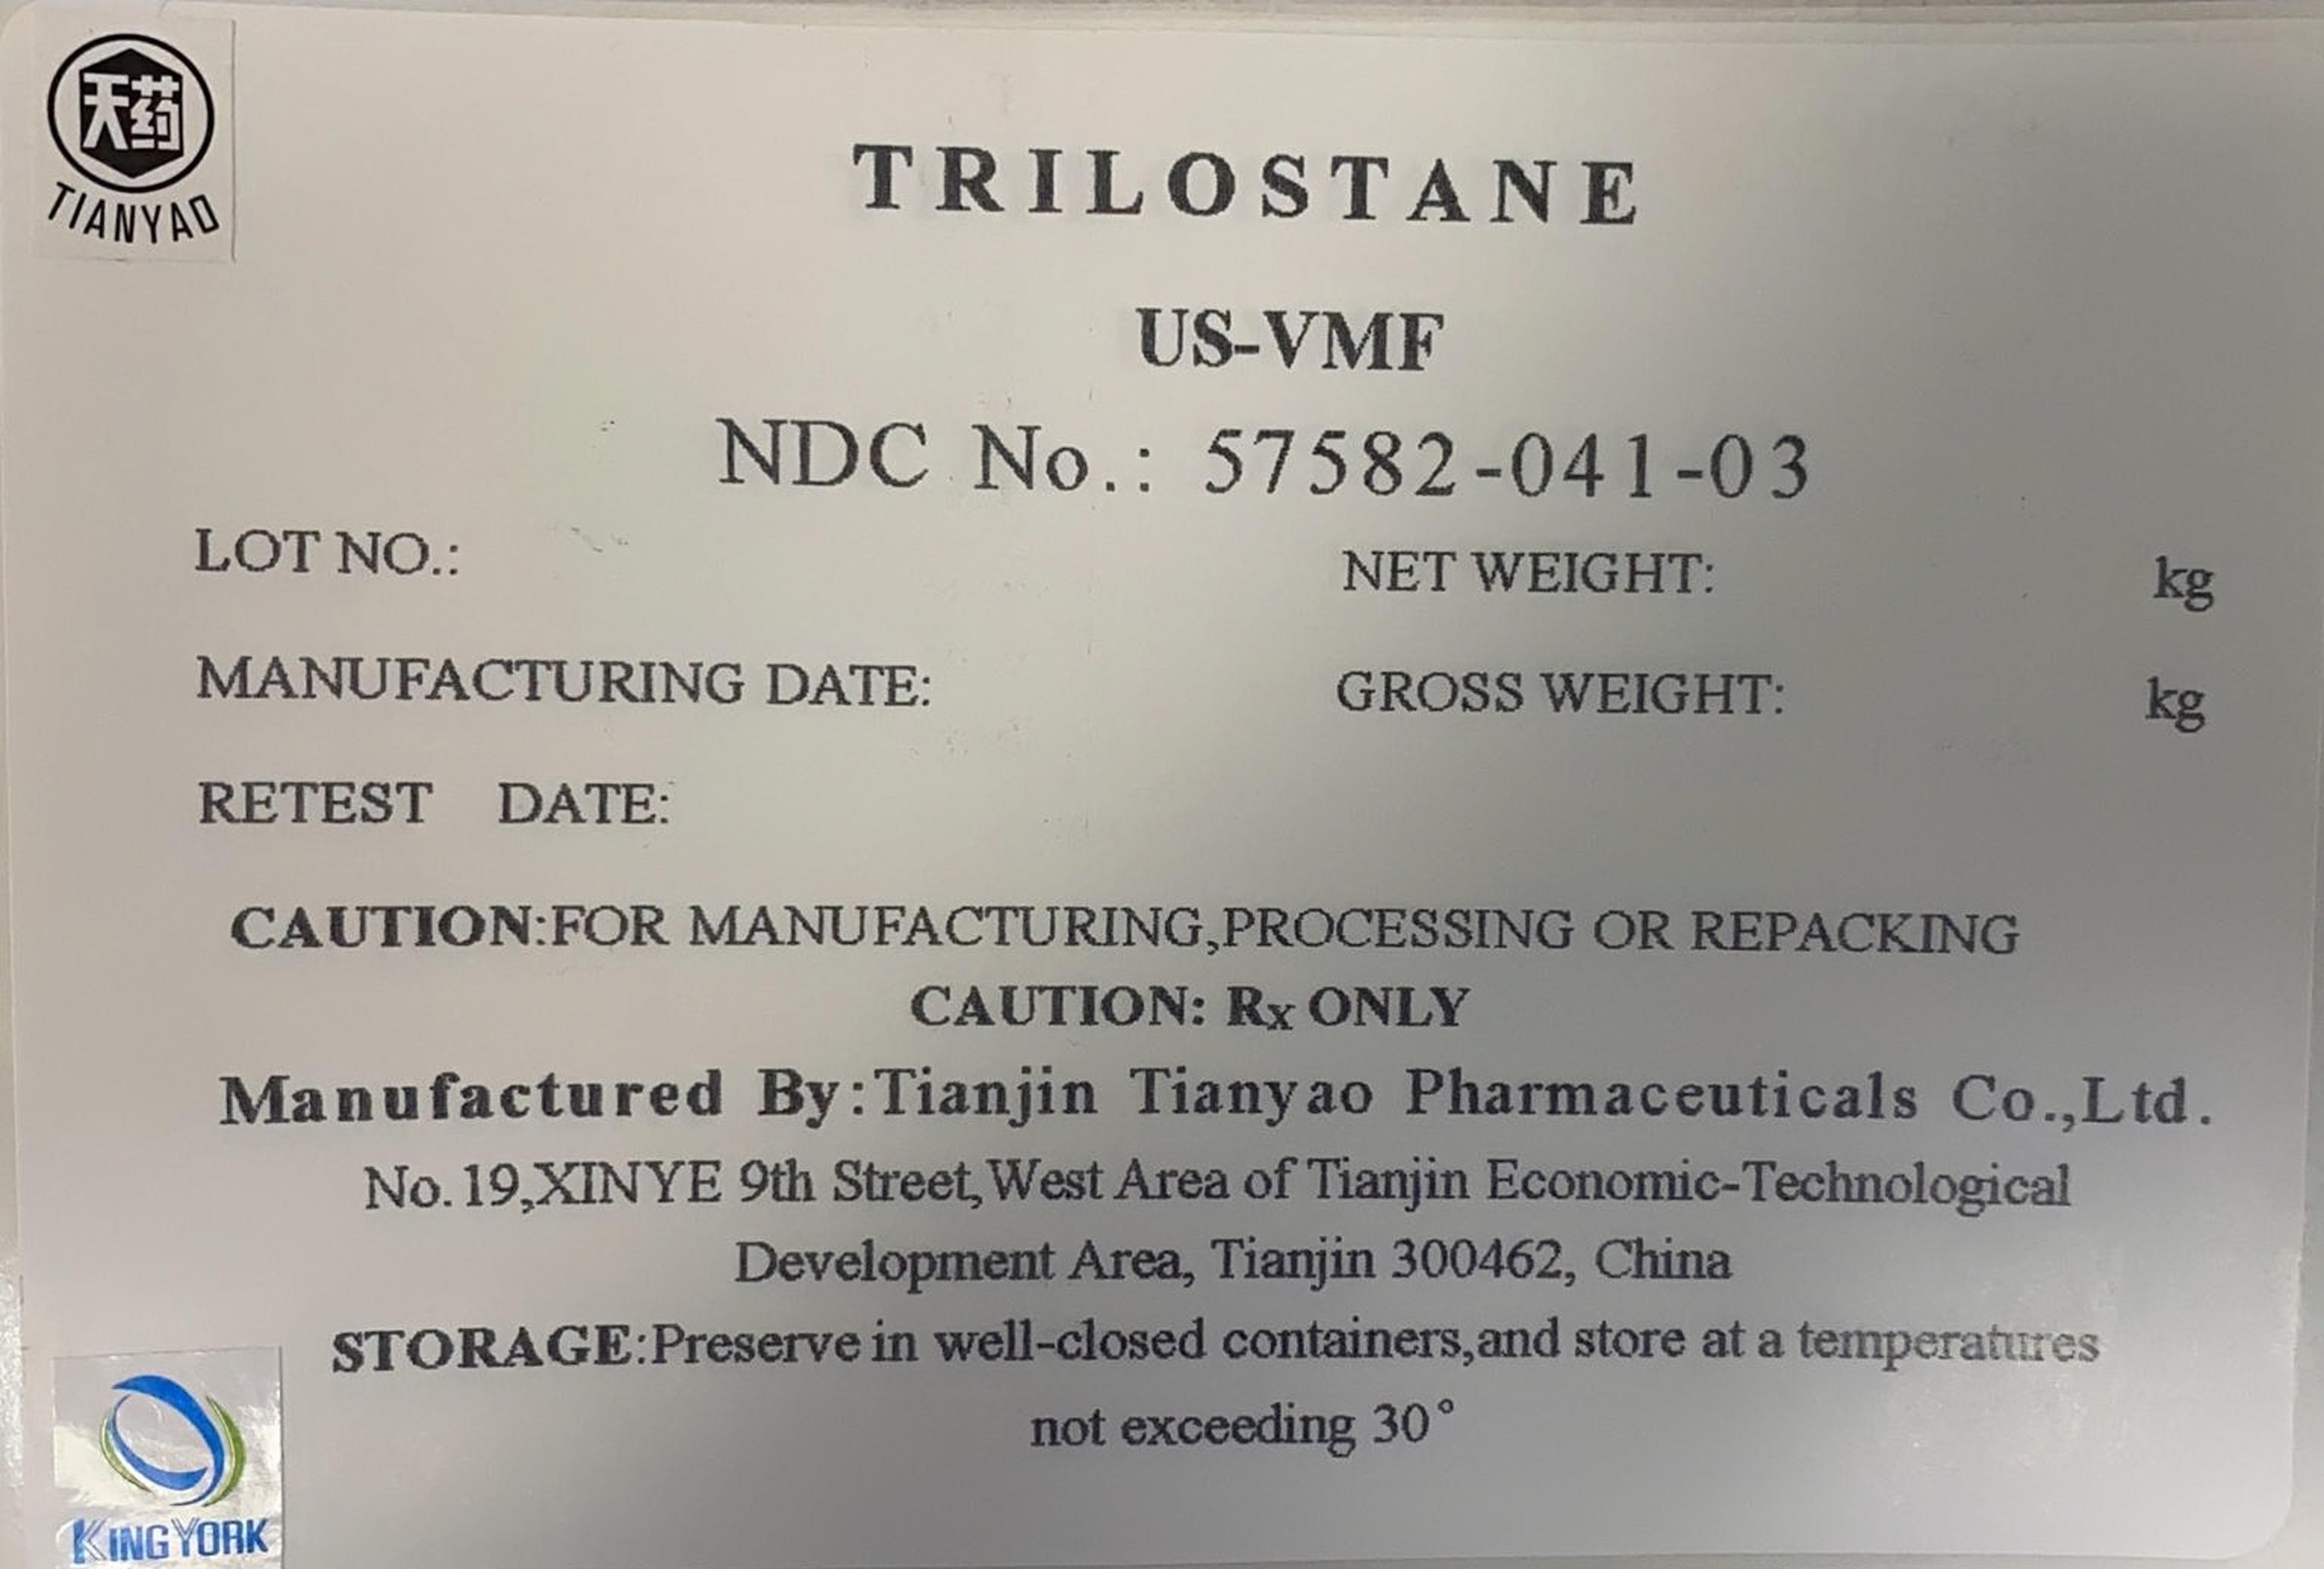 Commercial label of trilostane